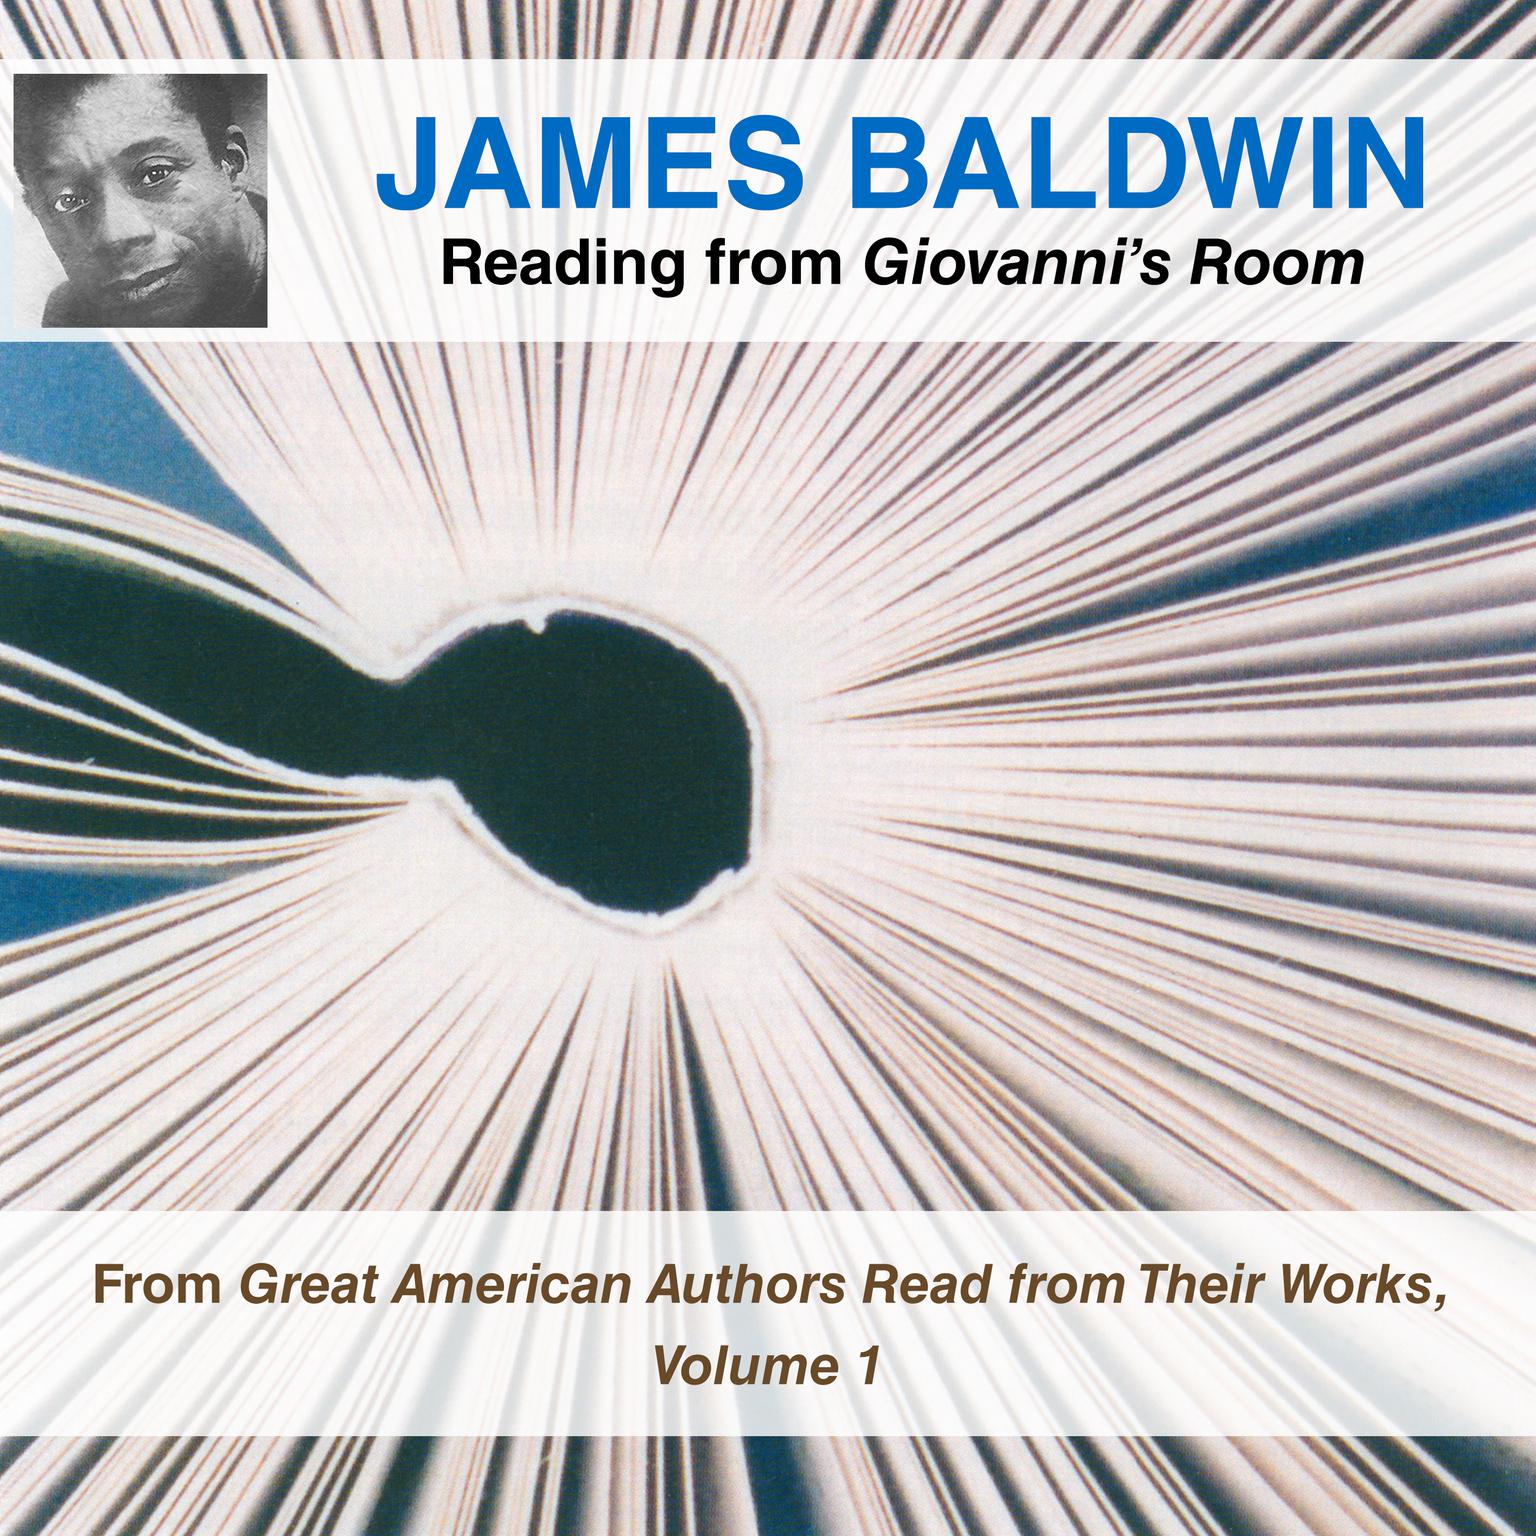 James Baldwin Reading from Giovanni’s Room: From Great American Authors Read from Their Works, Volume 1 Audiobook, by James Baldwin